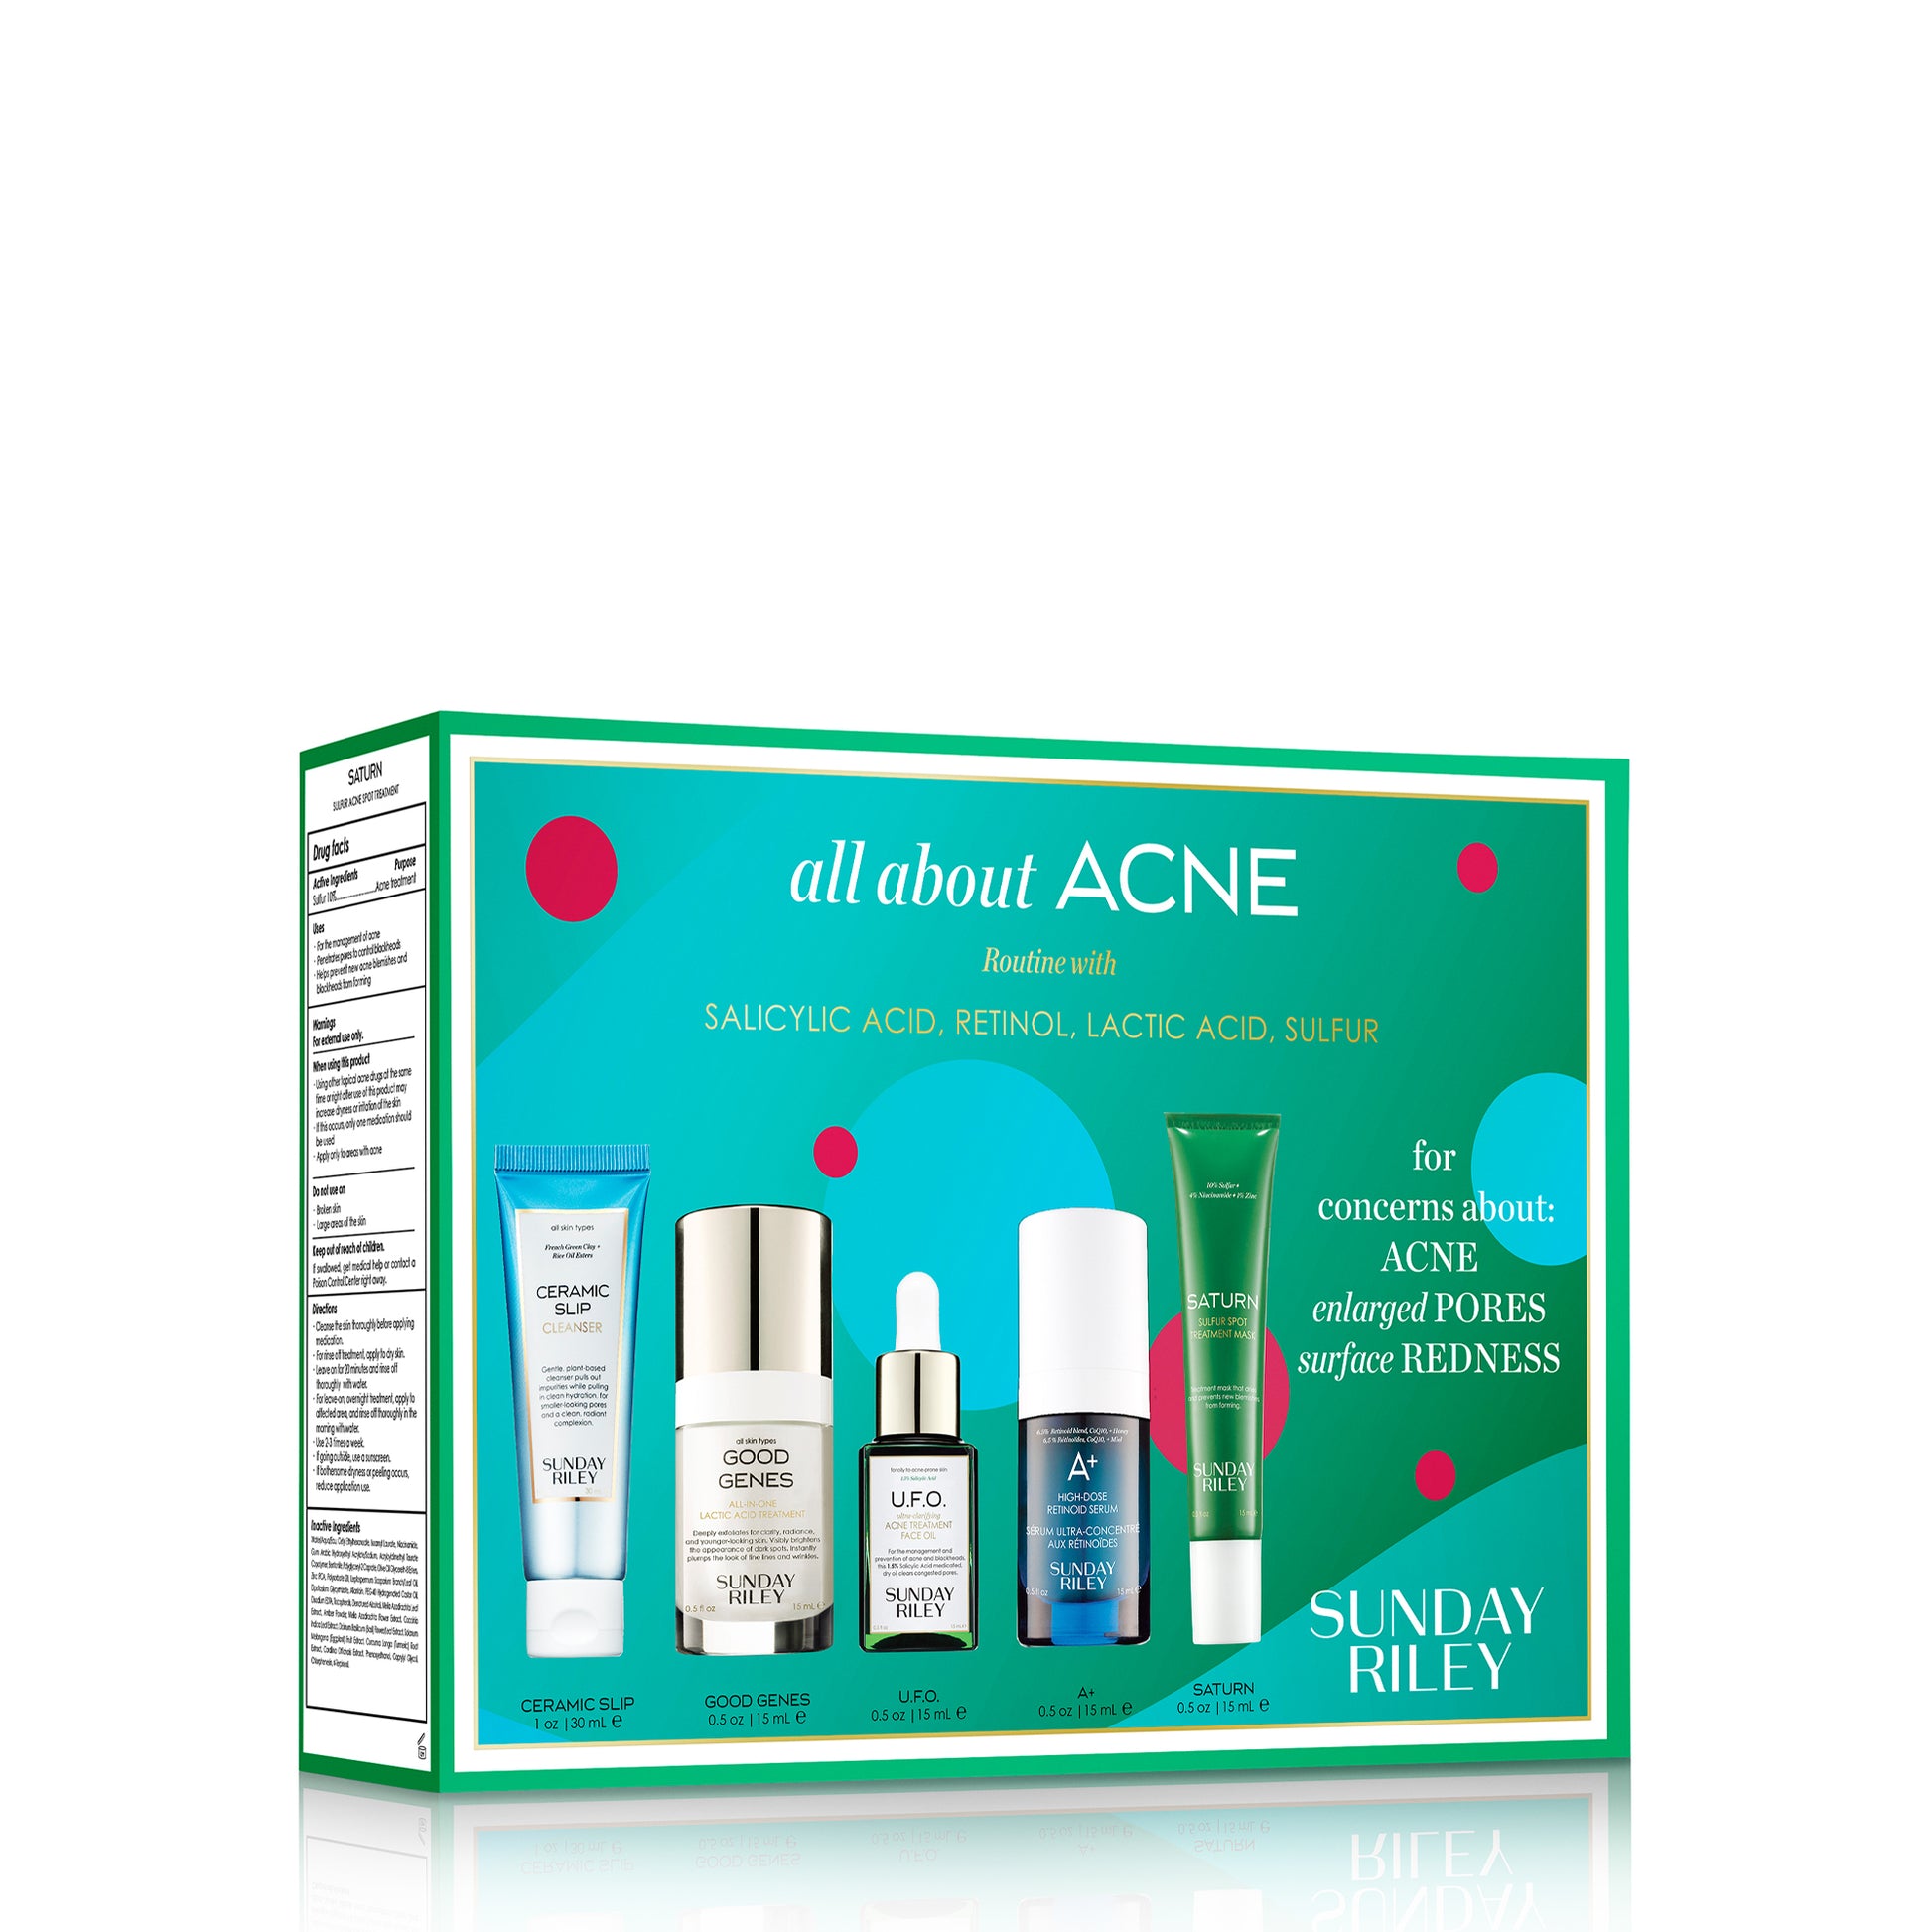 All About Acne kit pack shot